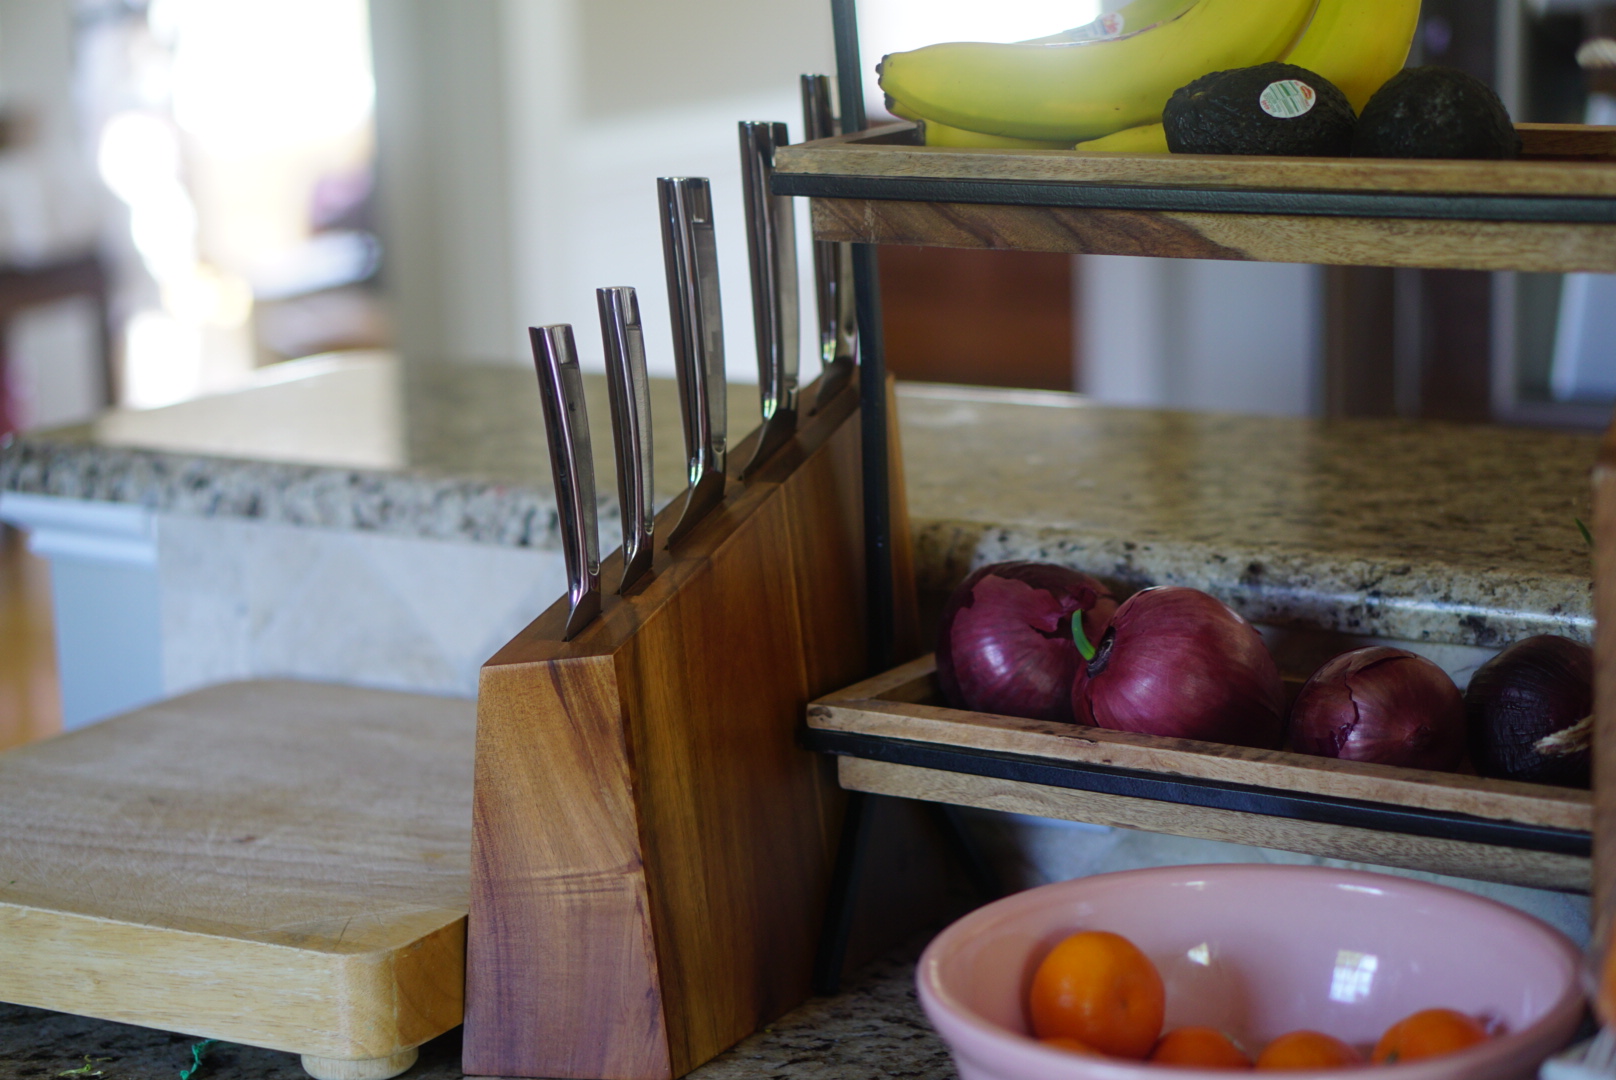 Kitchen Essentials - Best Knives Knife Block Cangshan Oprah's Favorite Things - Shop For no eBay - ebay home goods via Misty Nelson, lifestyle blogger ad parenting influencer mom at frostedblog @frostedevents 